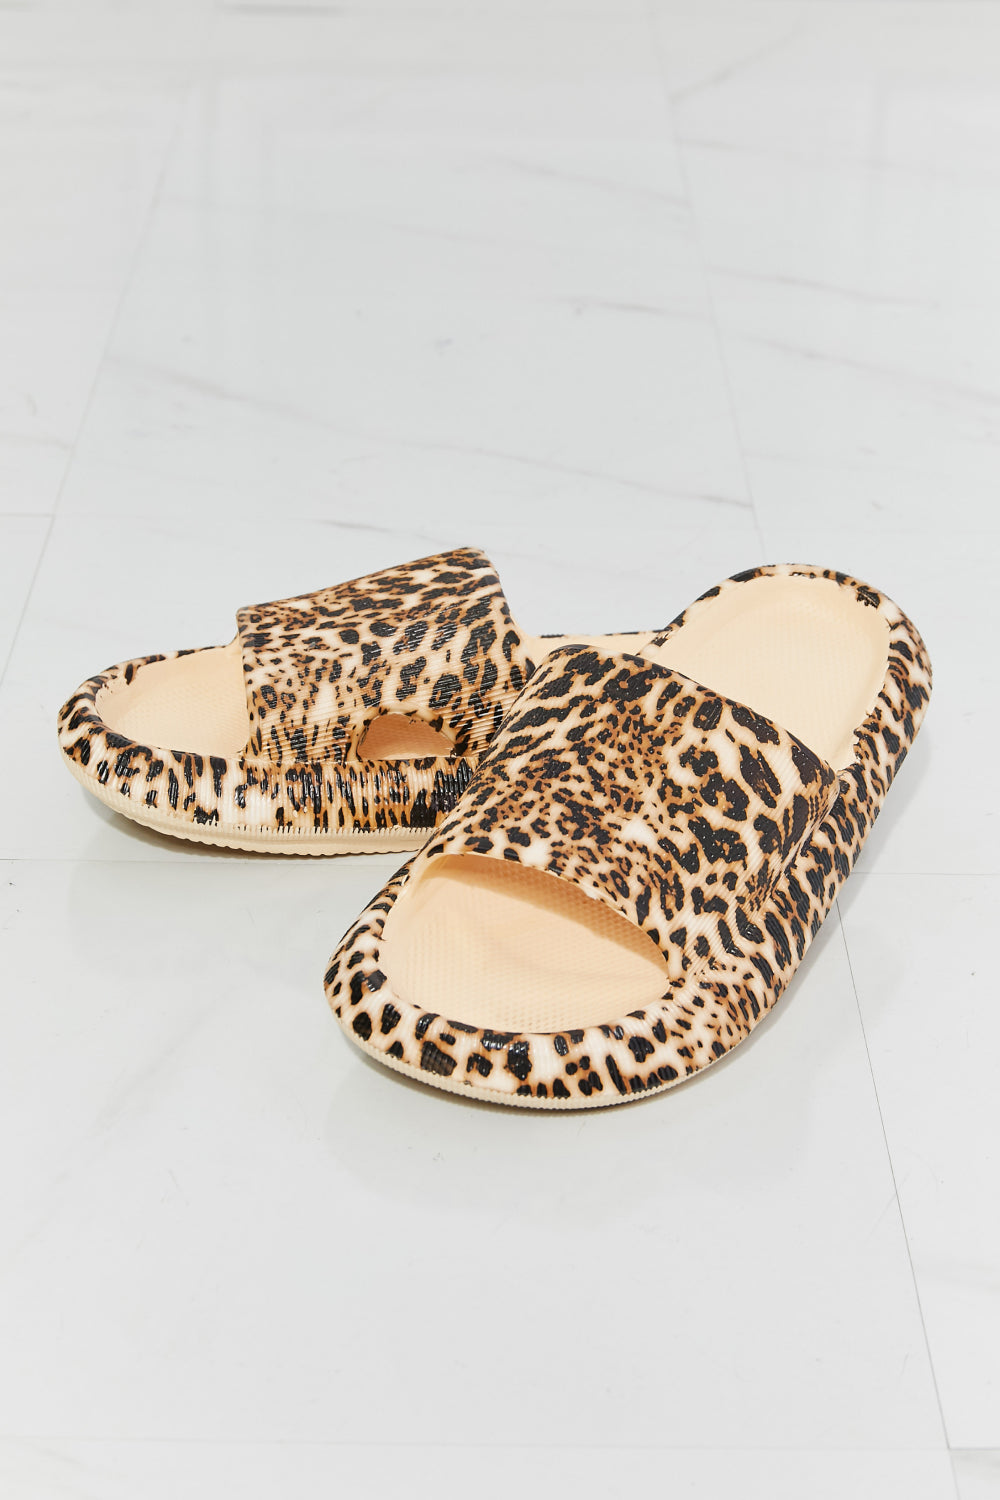 MMShoes Arms Around Me Open Toe Slide in Leopard The Stout Steer